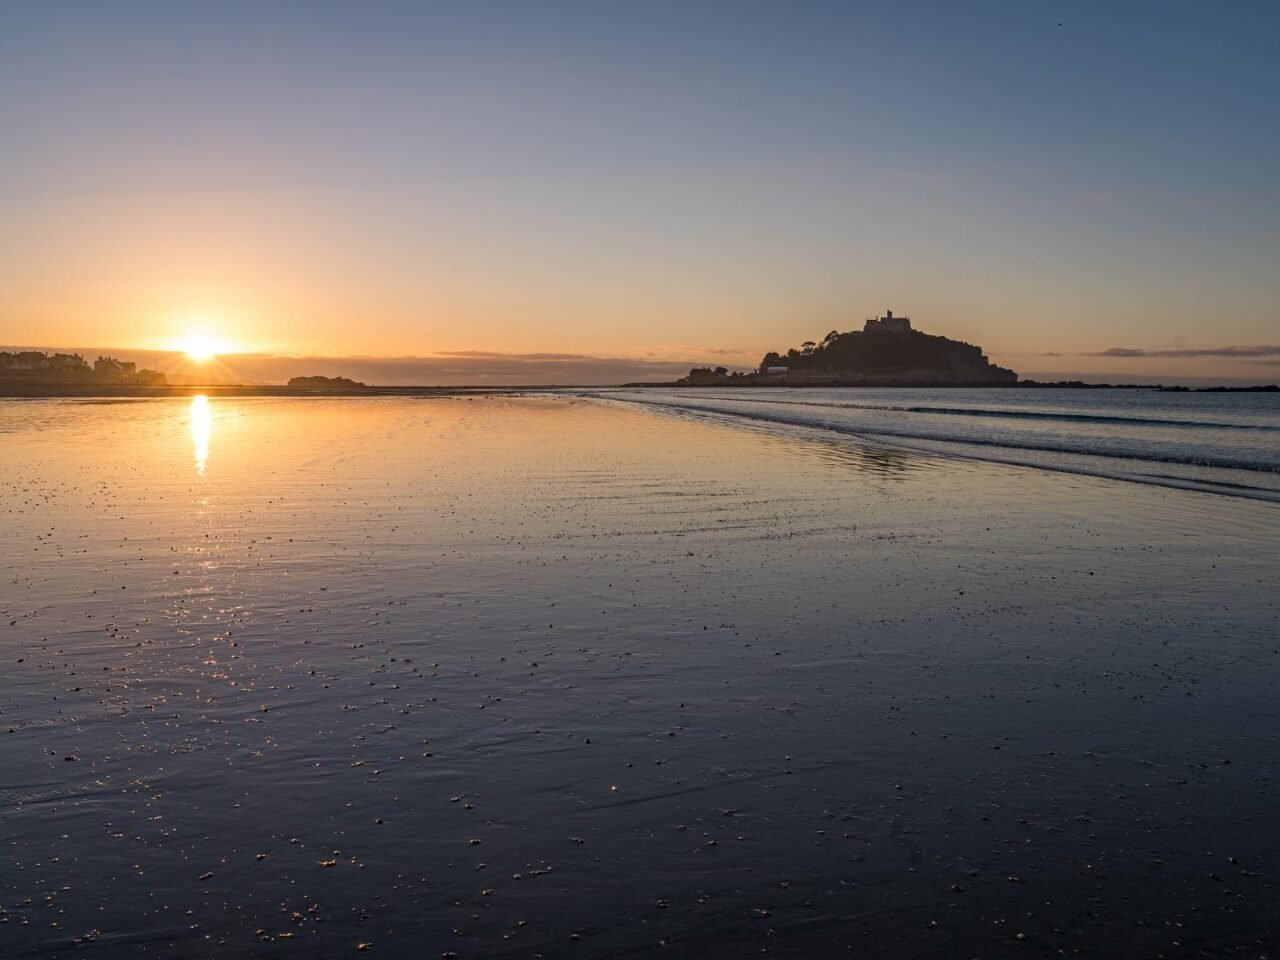 https://ejl-accounting.co.uk/wp-content/uploads/2023/03/130122-St.-Michaels-Mount-Dawn-Hyperlapse-Excerpts-0006_1620x1080-1280x960.jpg